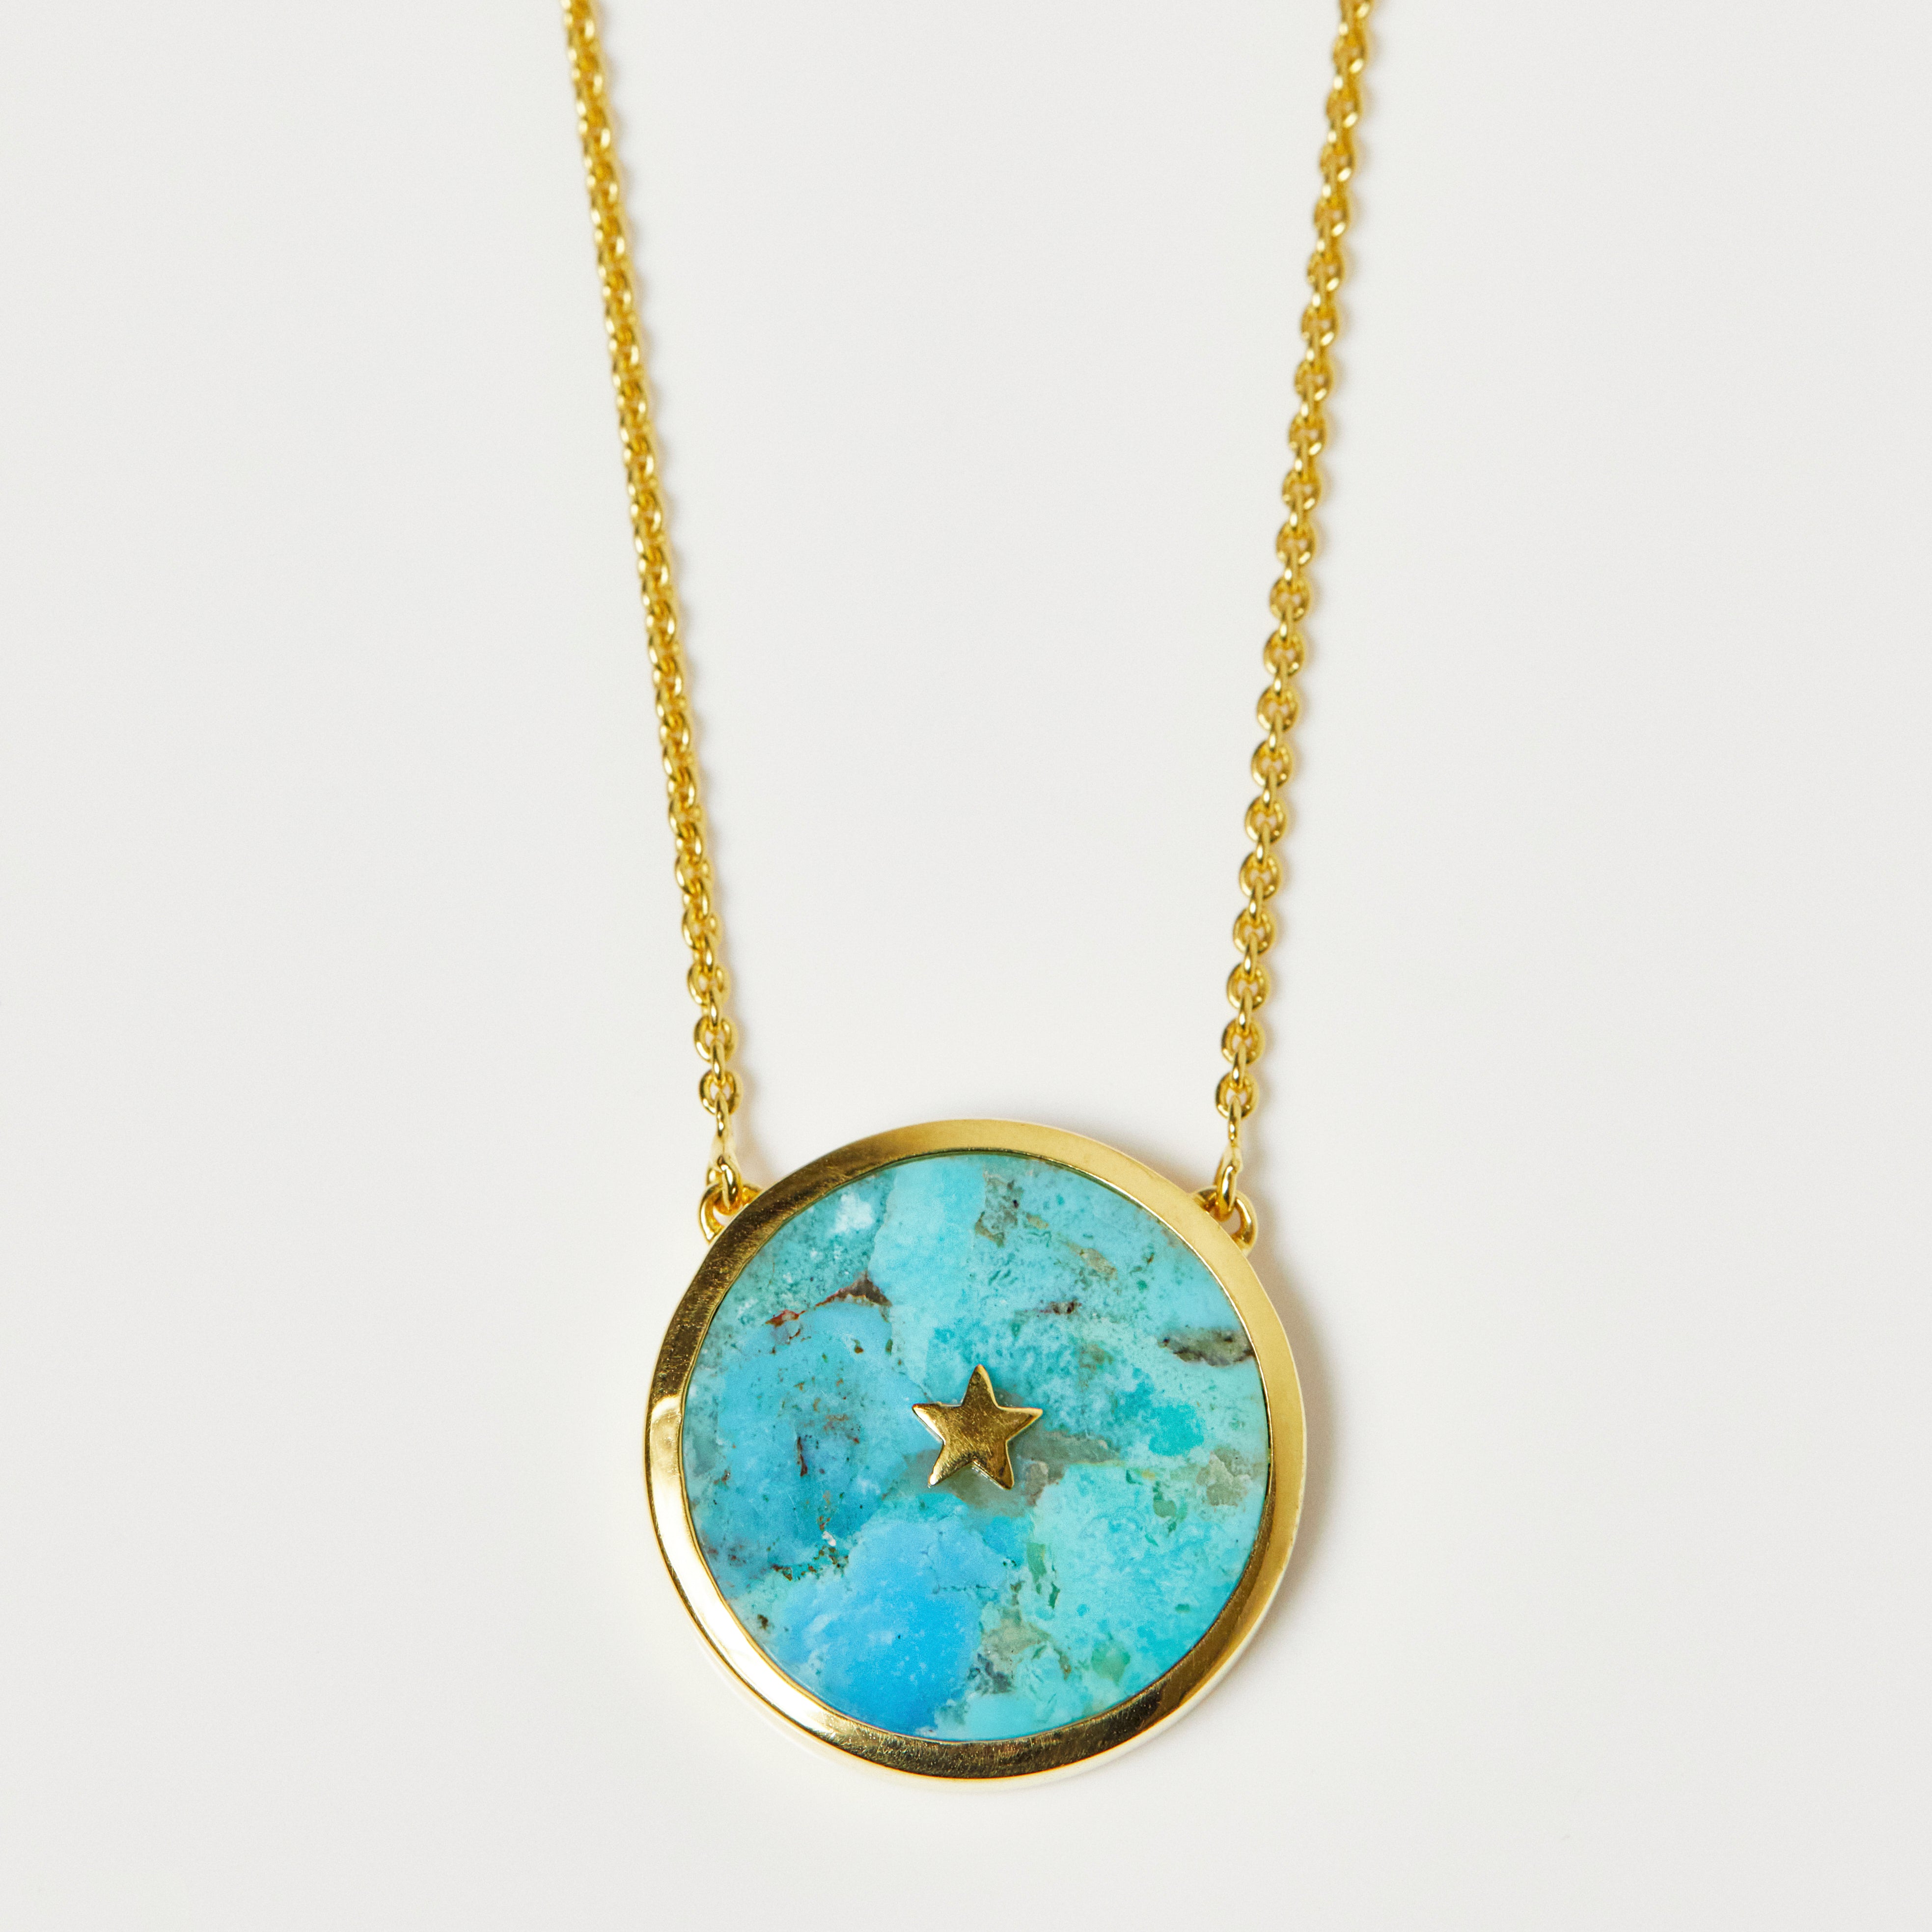 Night Sky Turquoise Pendant Necklace In Gold Vermeil - Necklace - Carrie Elizabeth